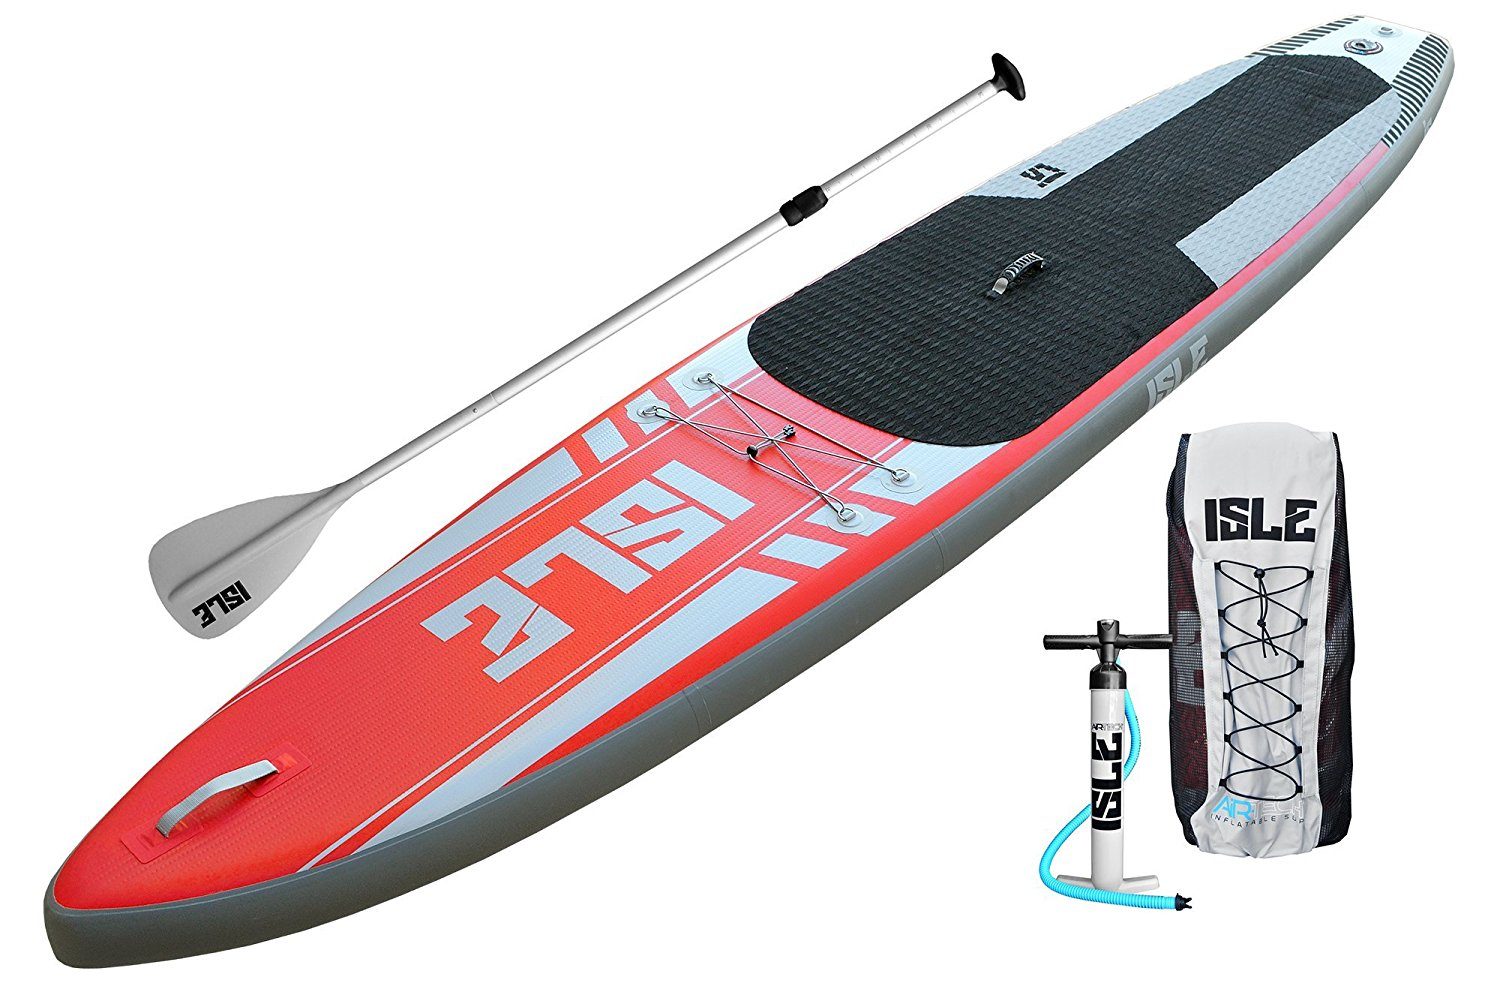 ISLE Airtech 12ft 6in Touring Inflatable Paddle Board